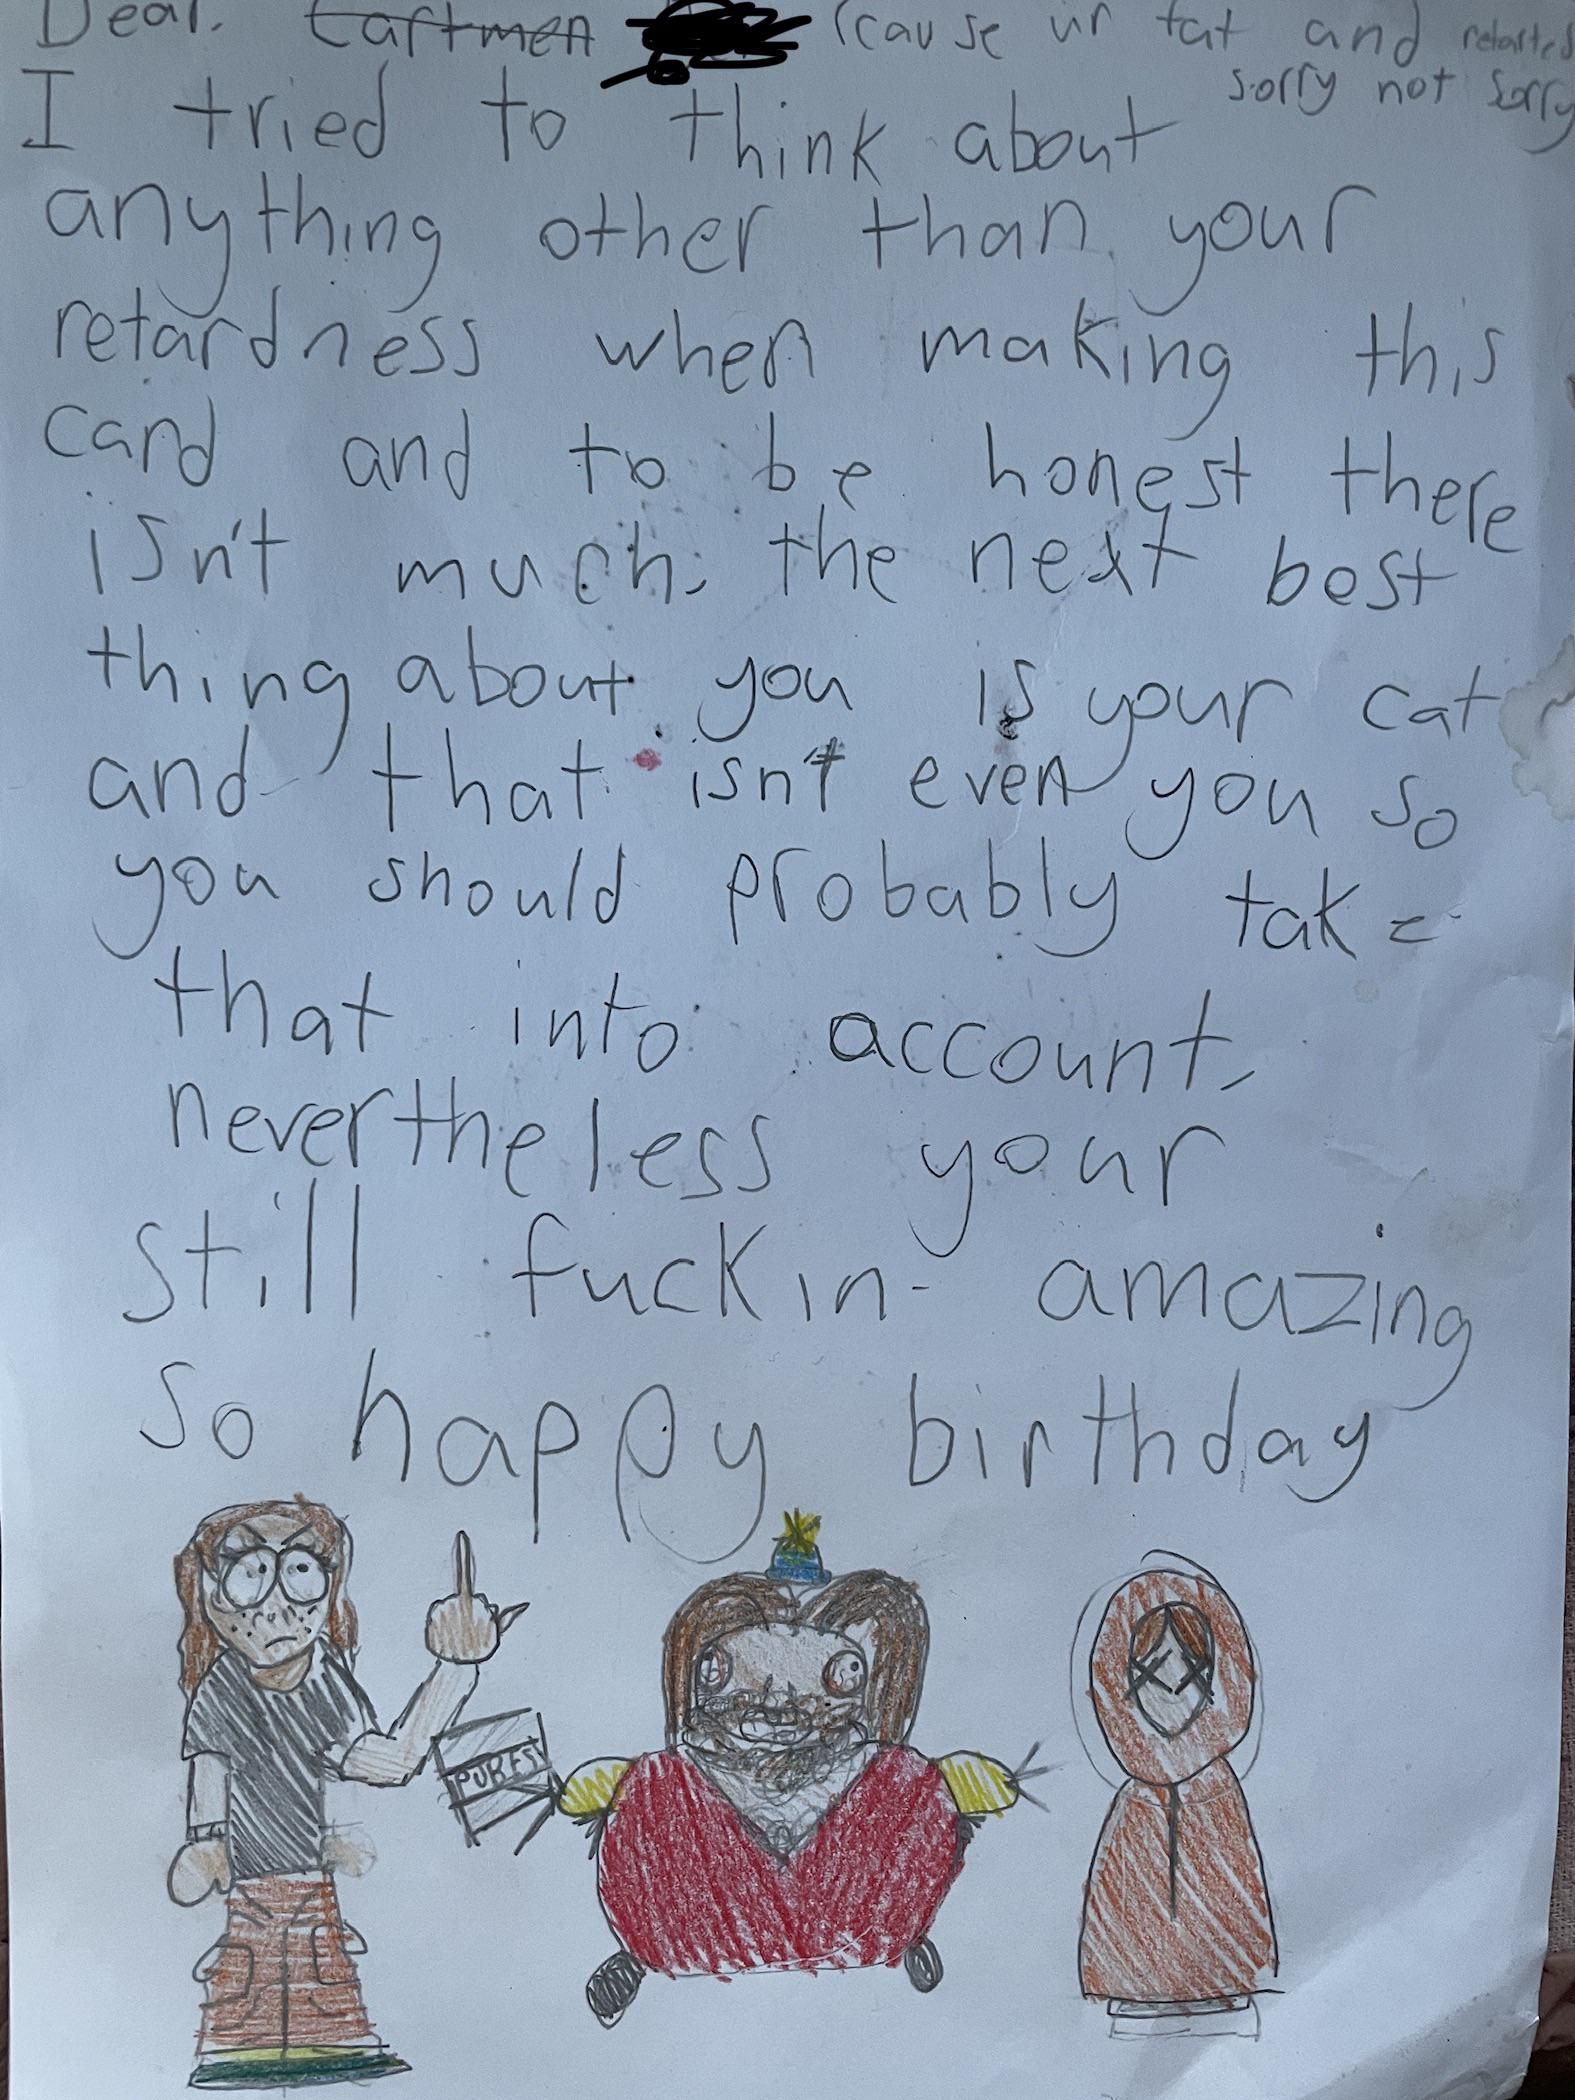 My partners daughter made me the sweetest birthday card I’ve ever received